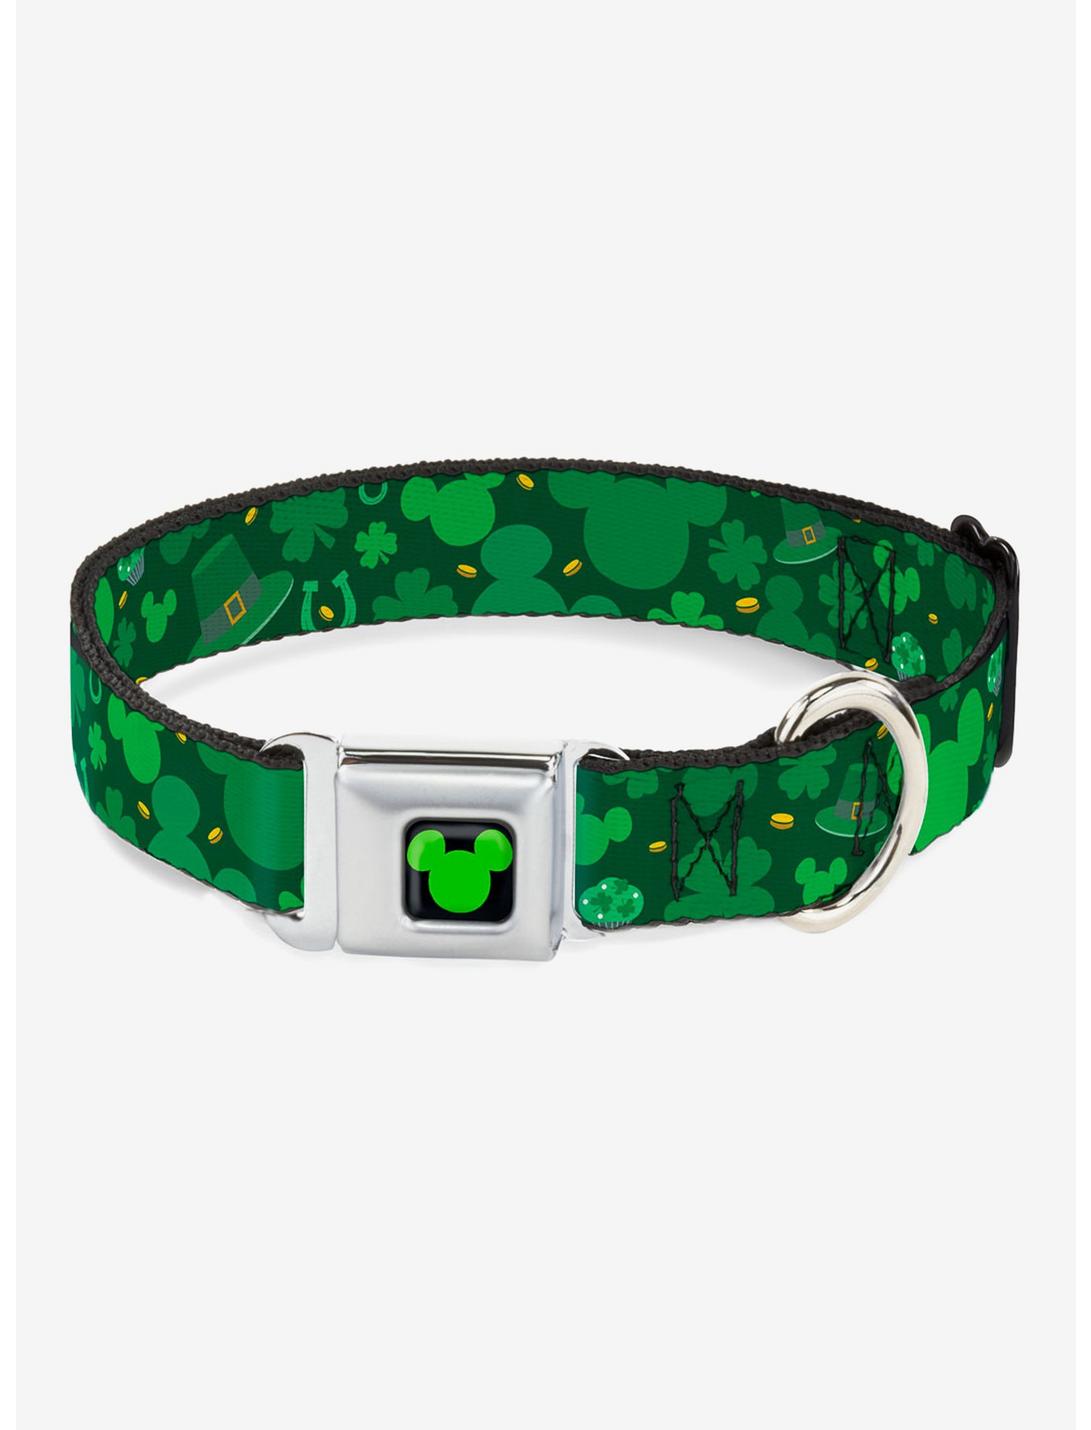 Disney Mickey Mouse St Patricks Day Collage Seatbelt Buckle Dog Collar, GREEN, hi-res